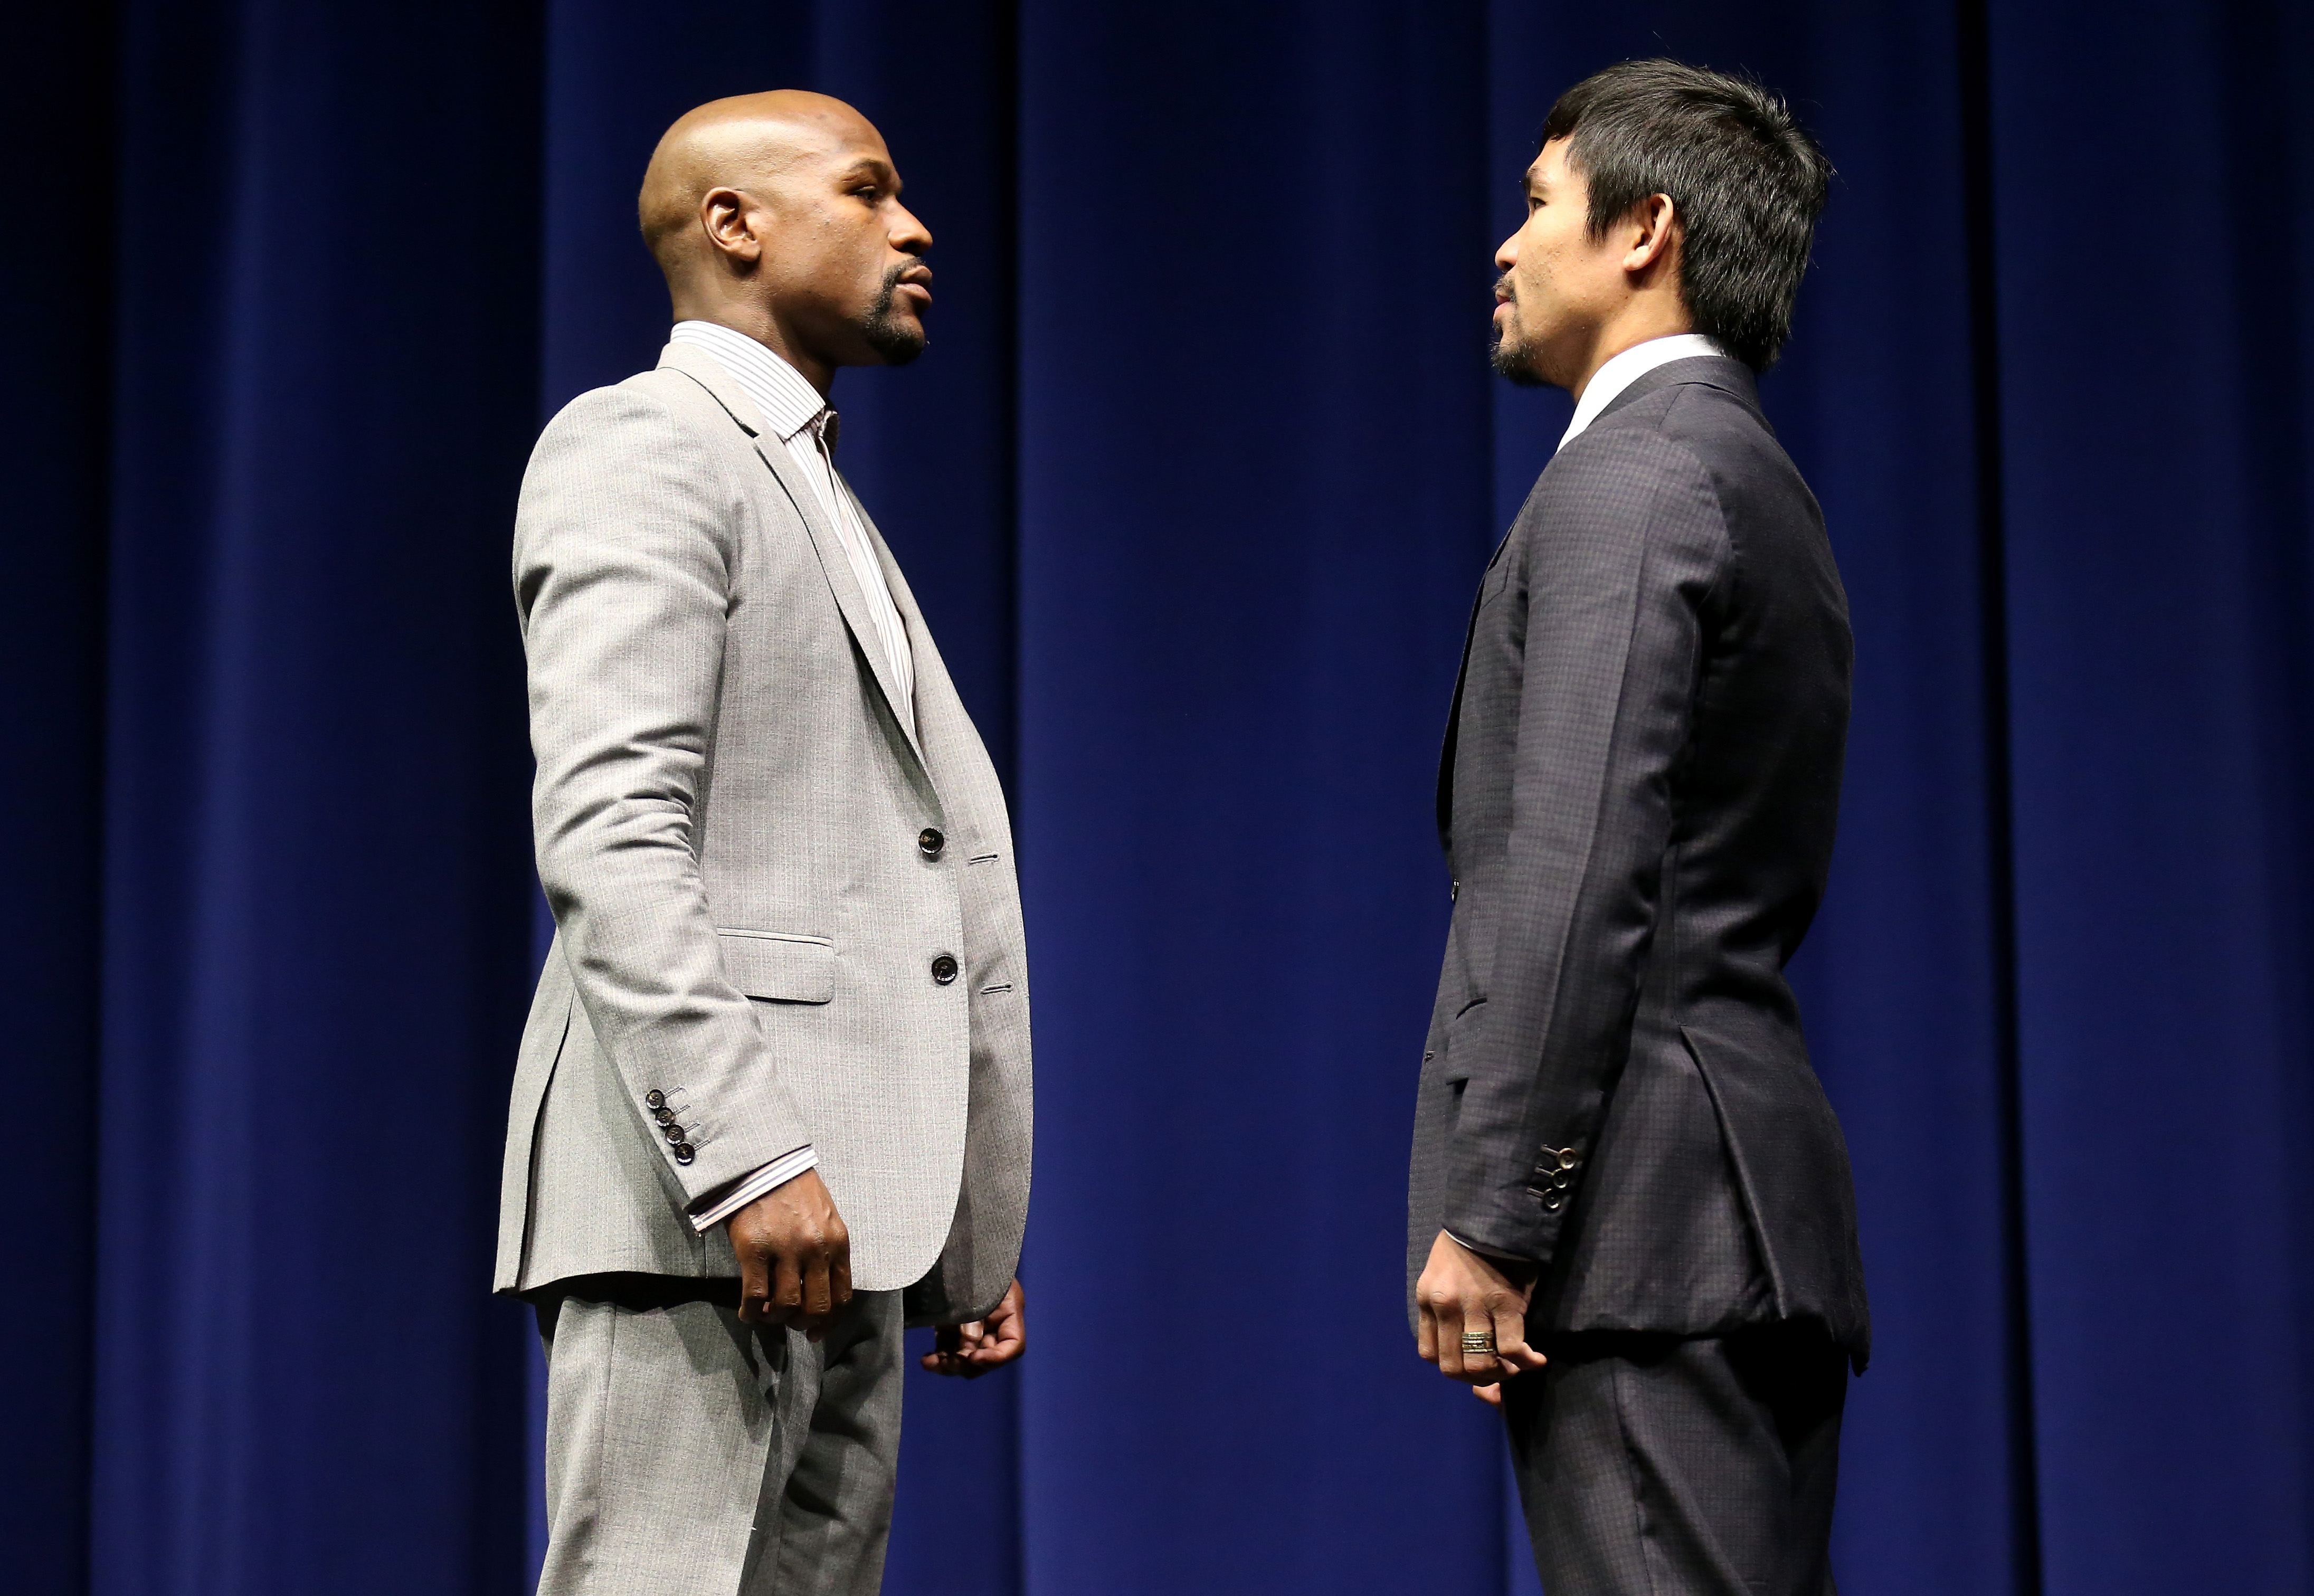 Watch Manny Pacquiao Vs Floyd Mayweather Online Free